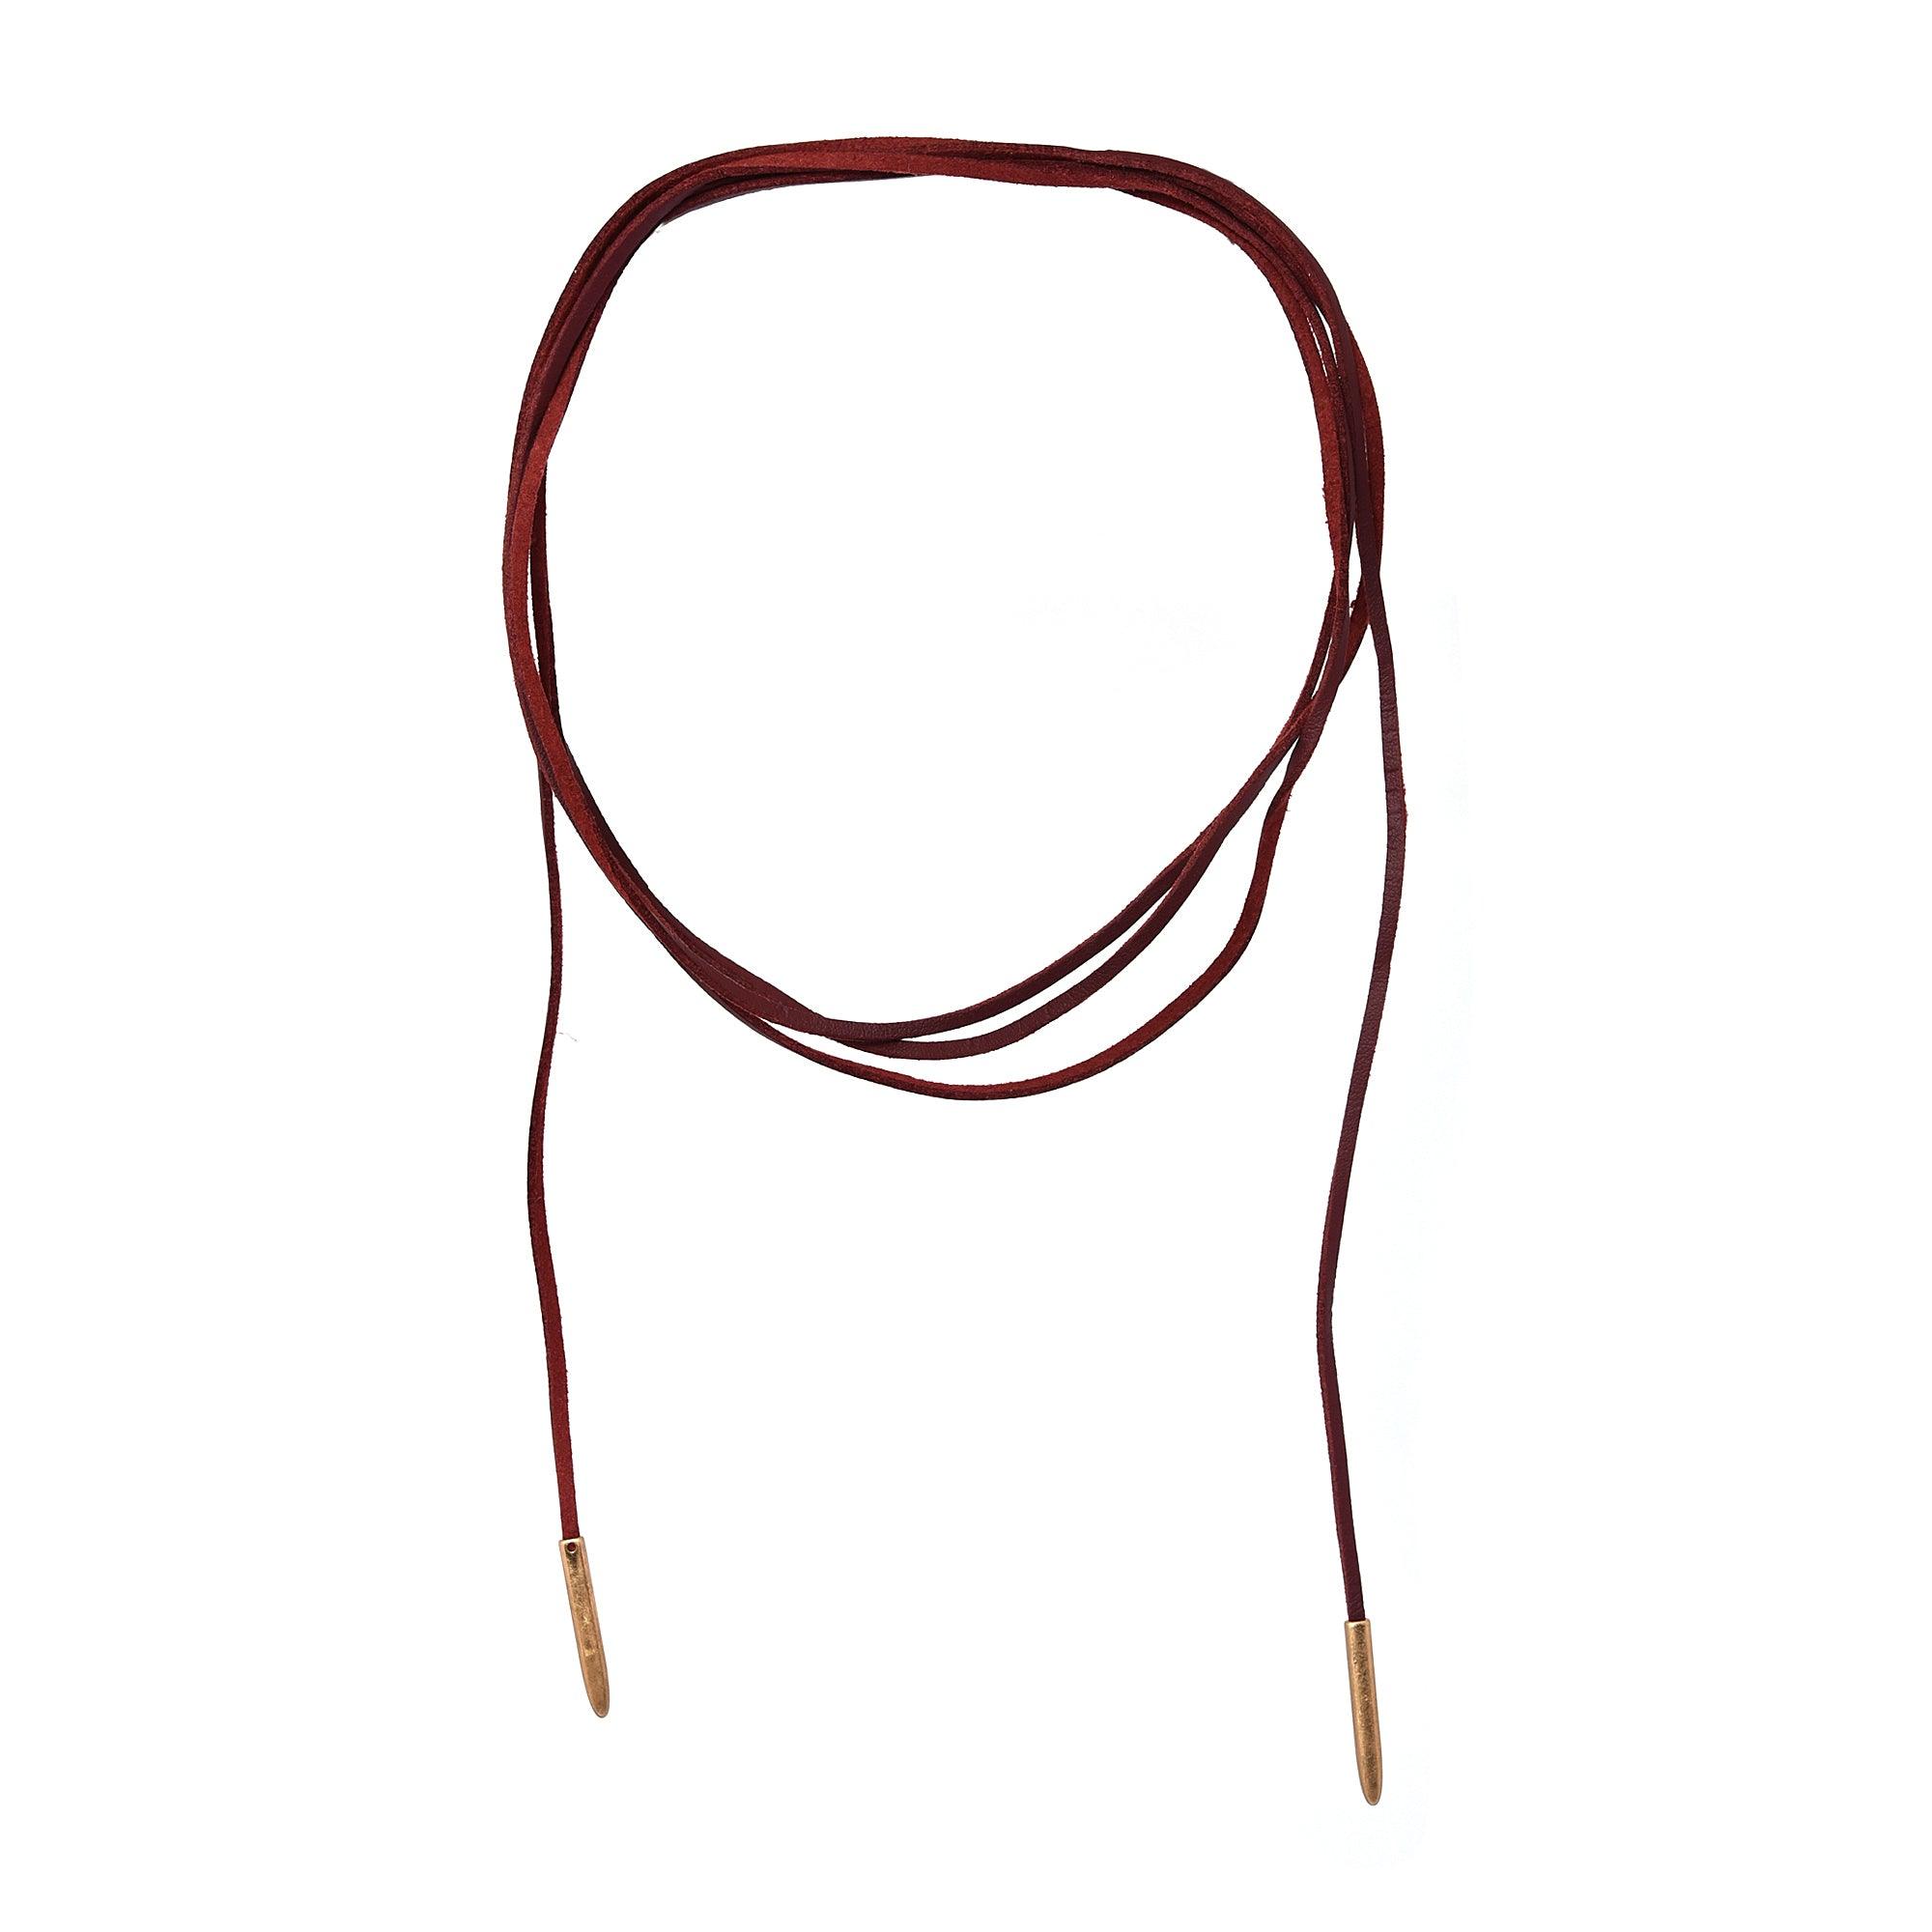 Tie up statement necklaces choker style online at lowest prices - The Fineworld